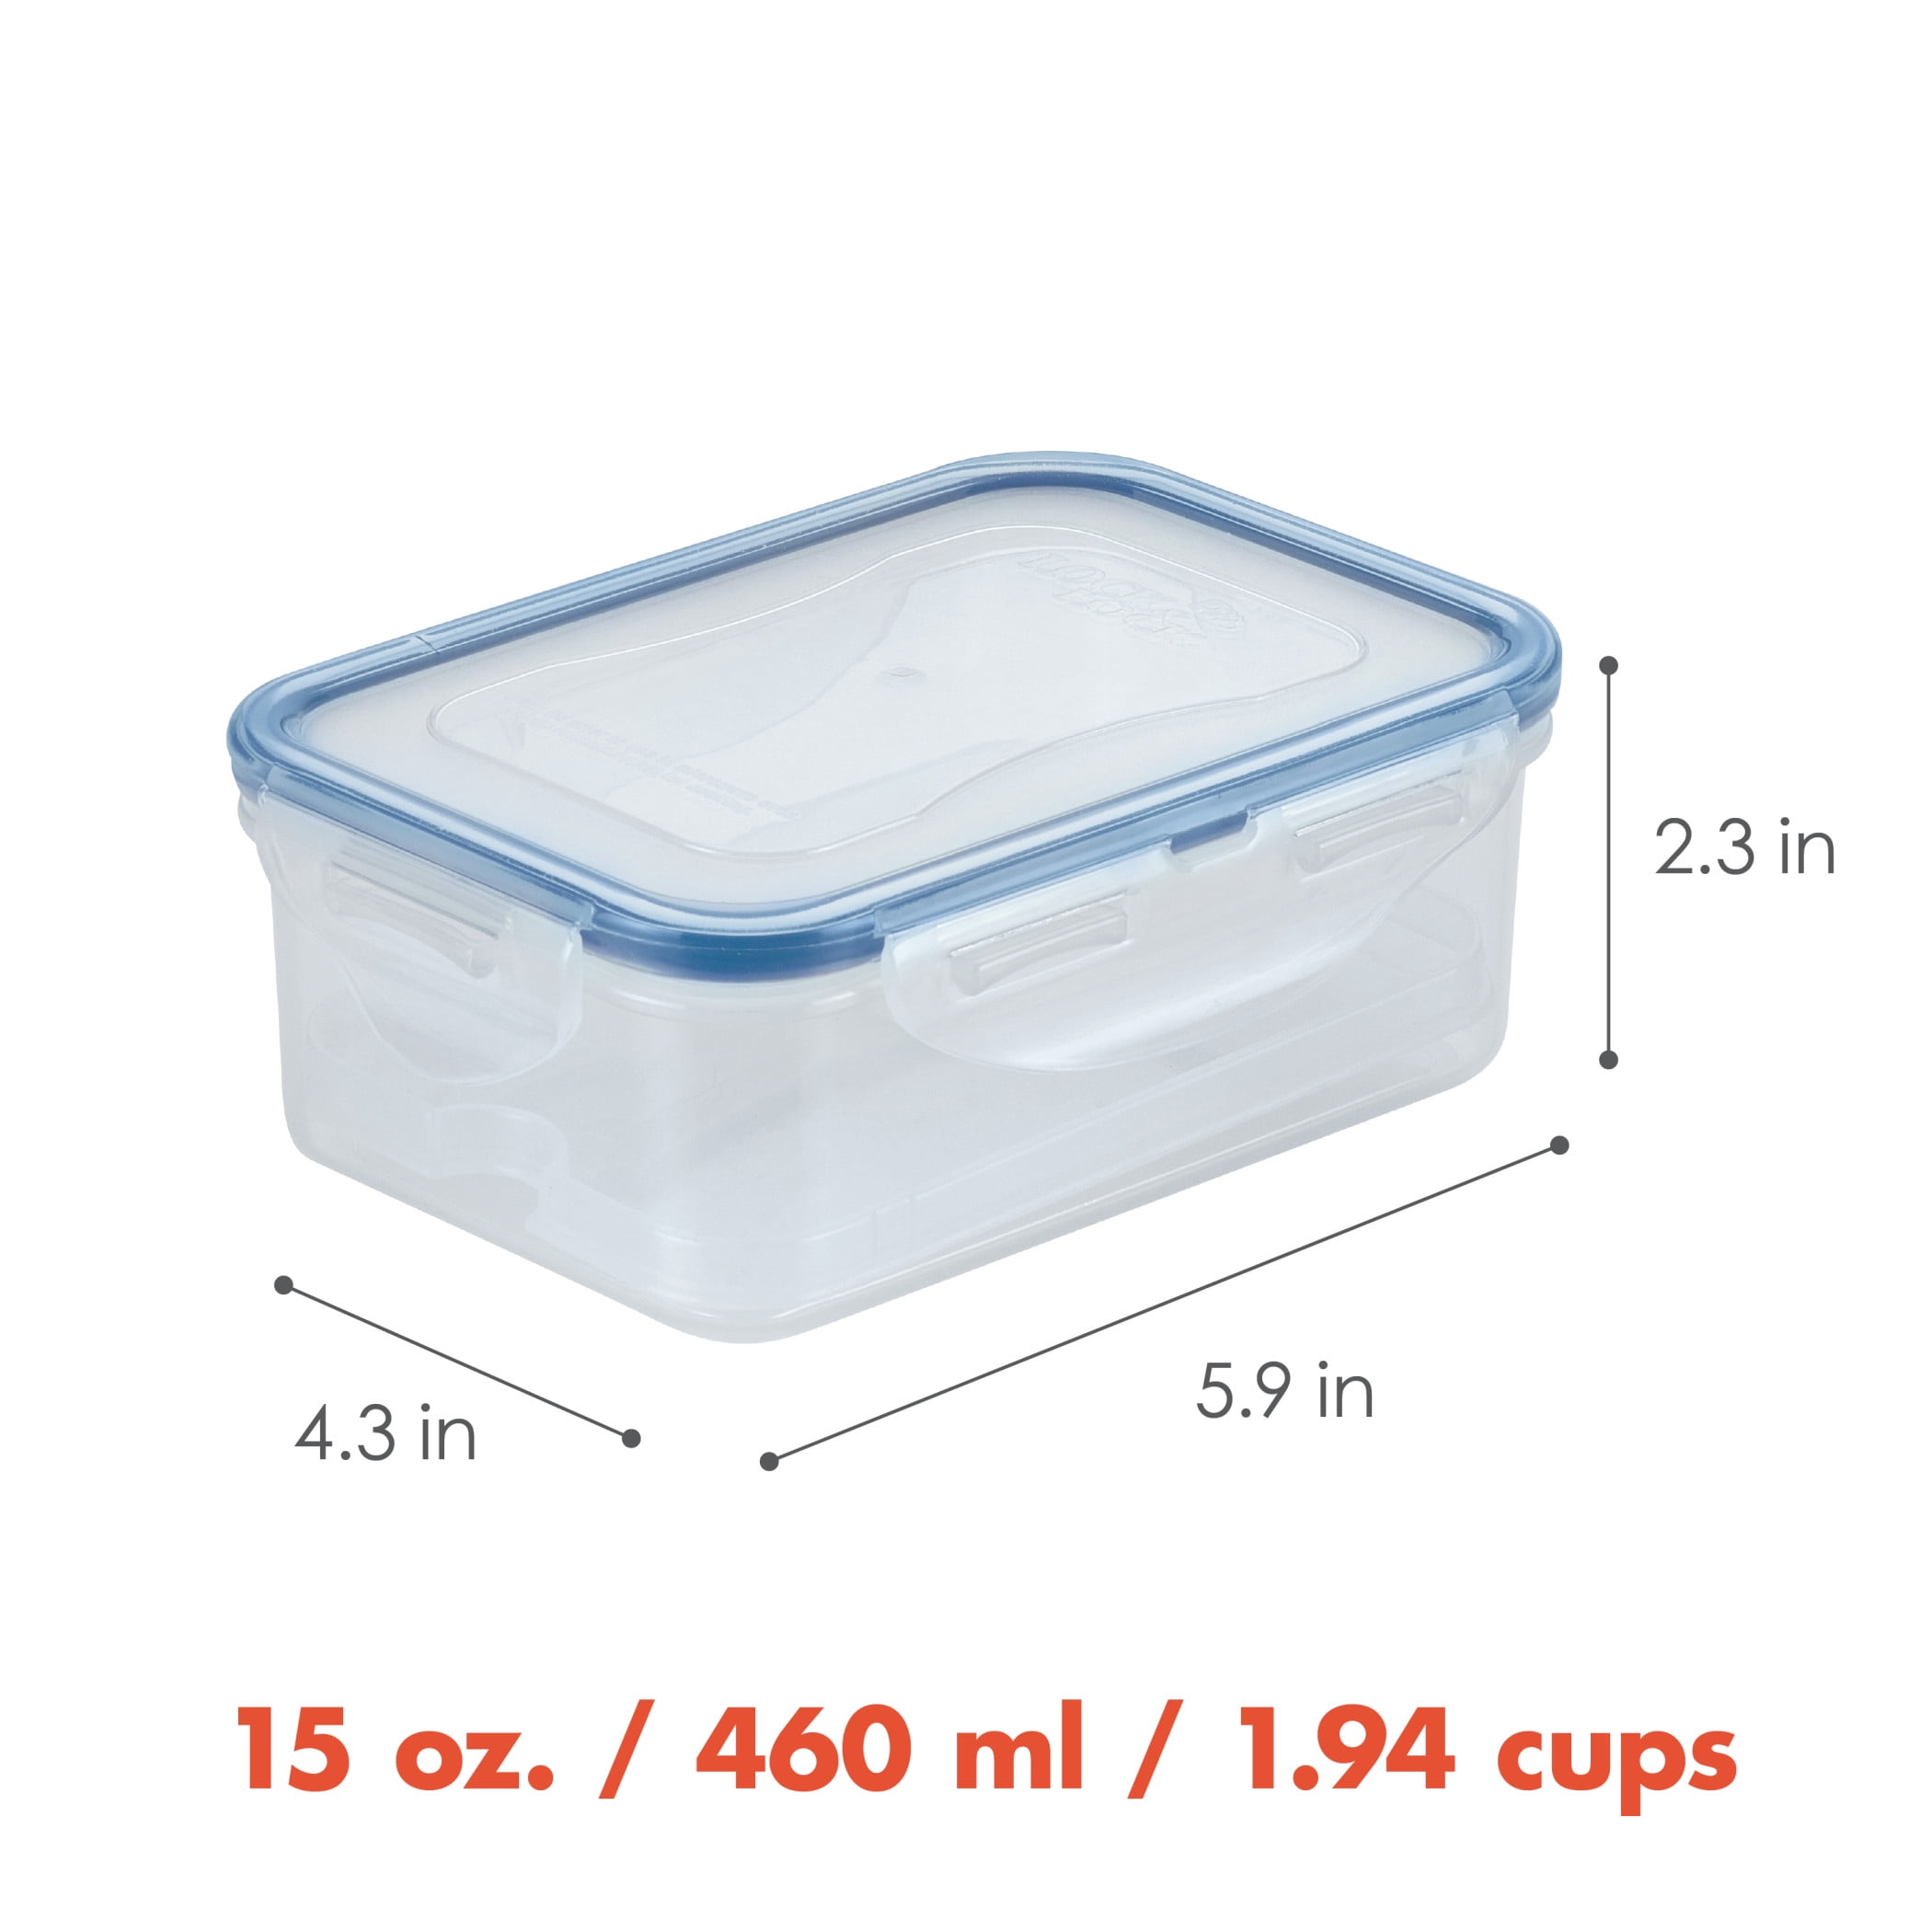 LocknLock Easy Essentials Rectangular Butter and Cheese Container